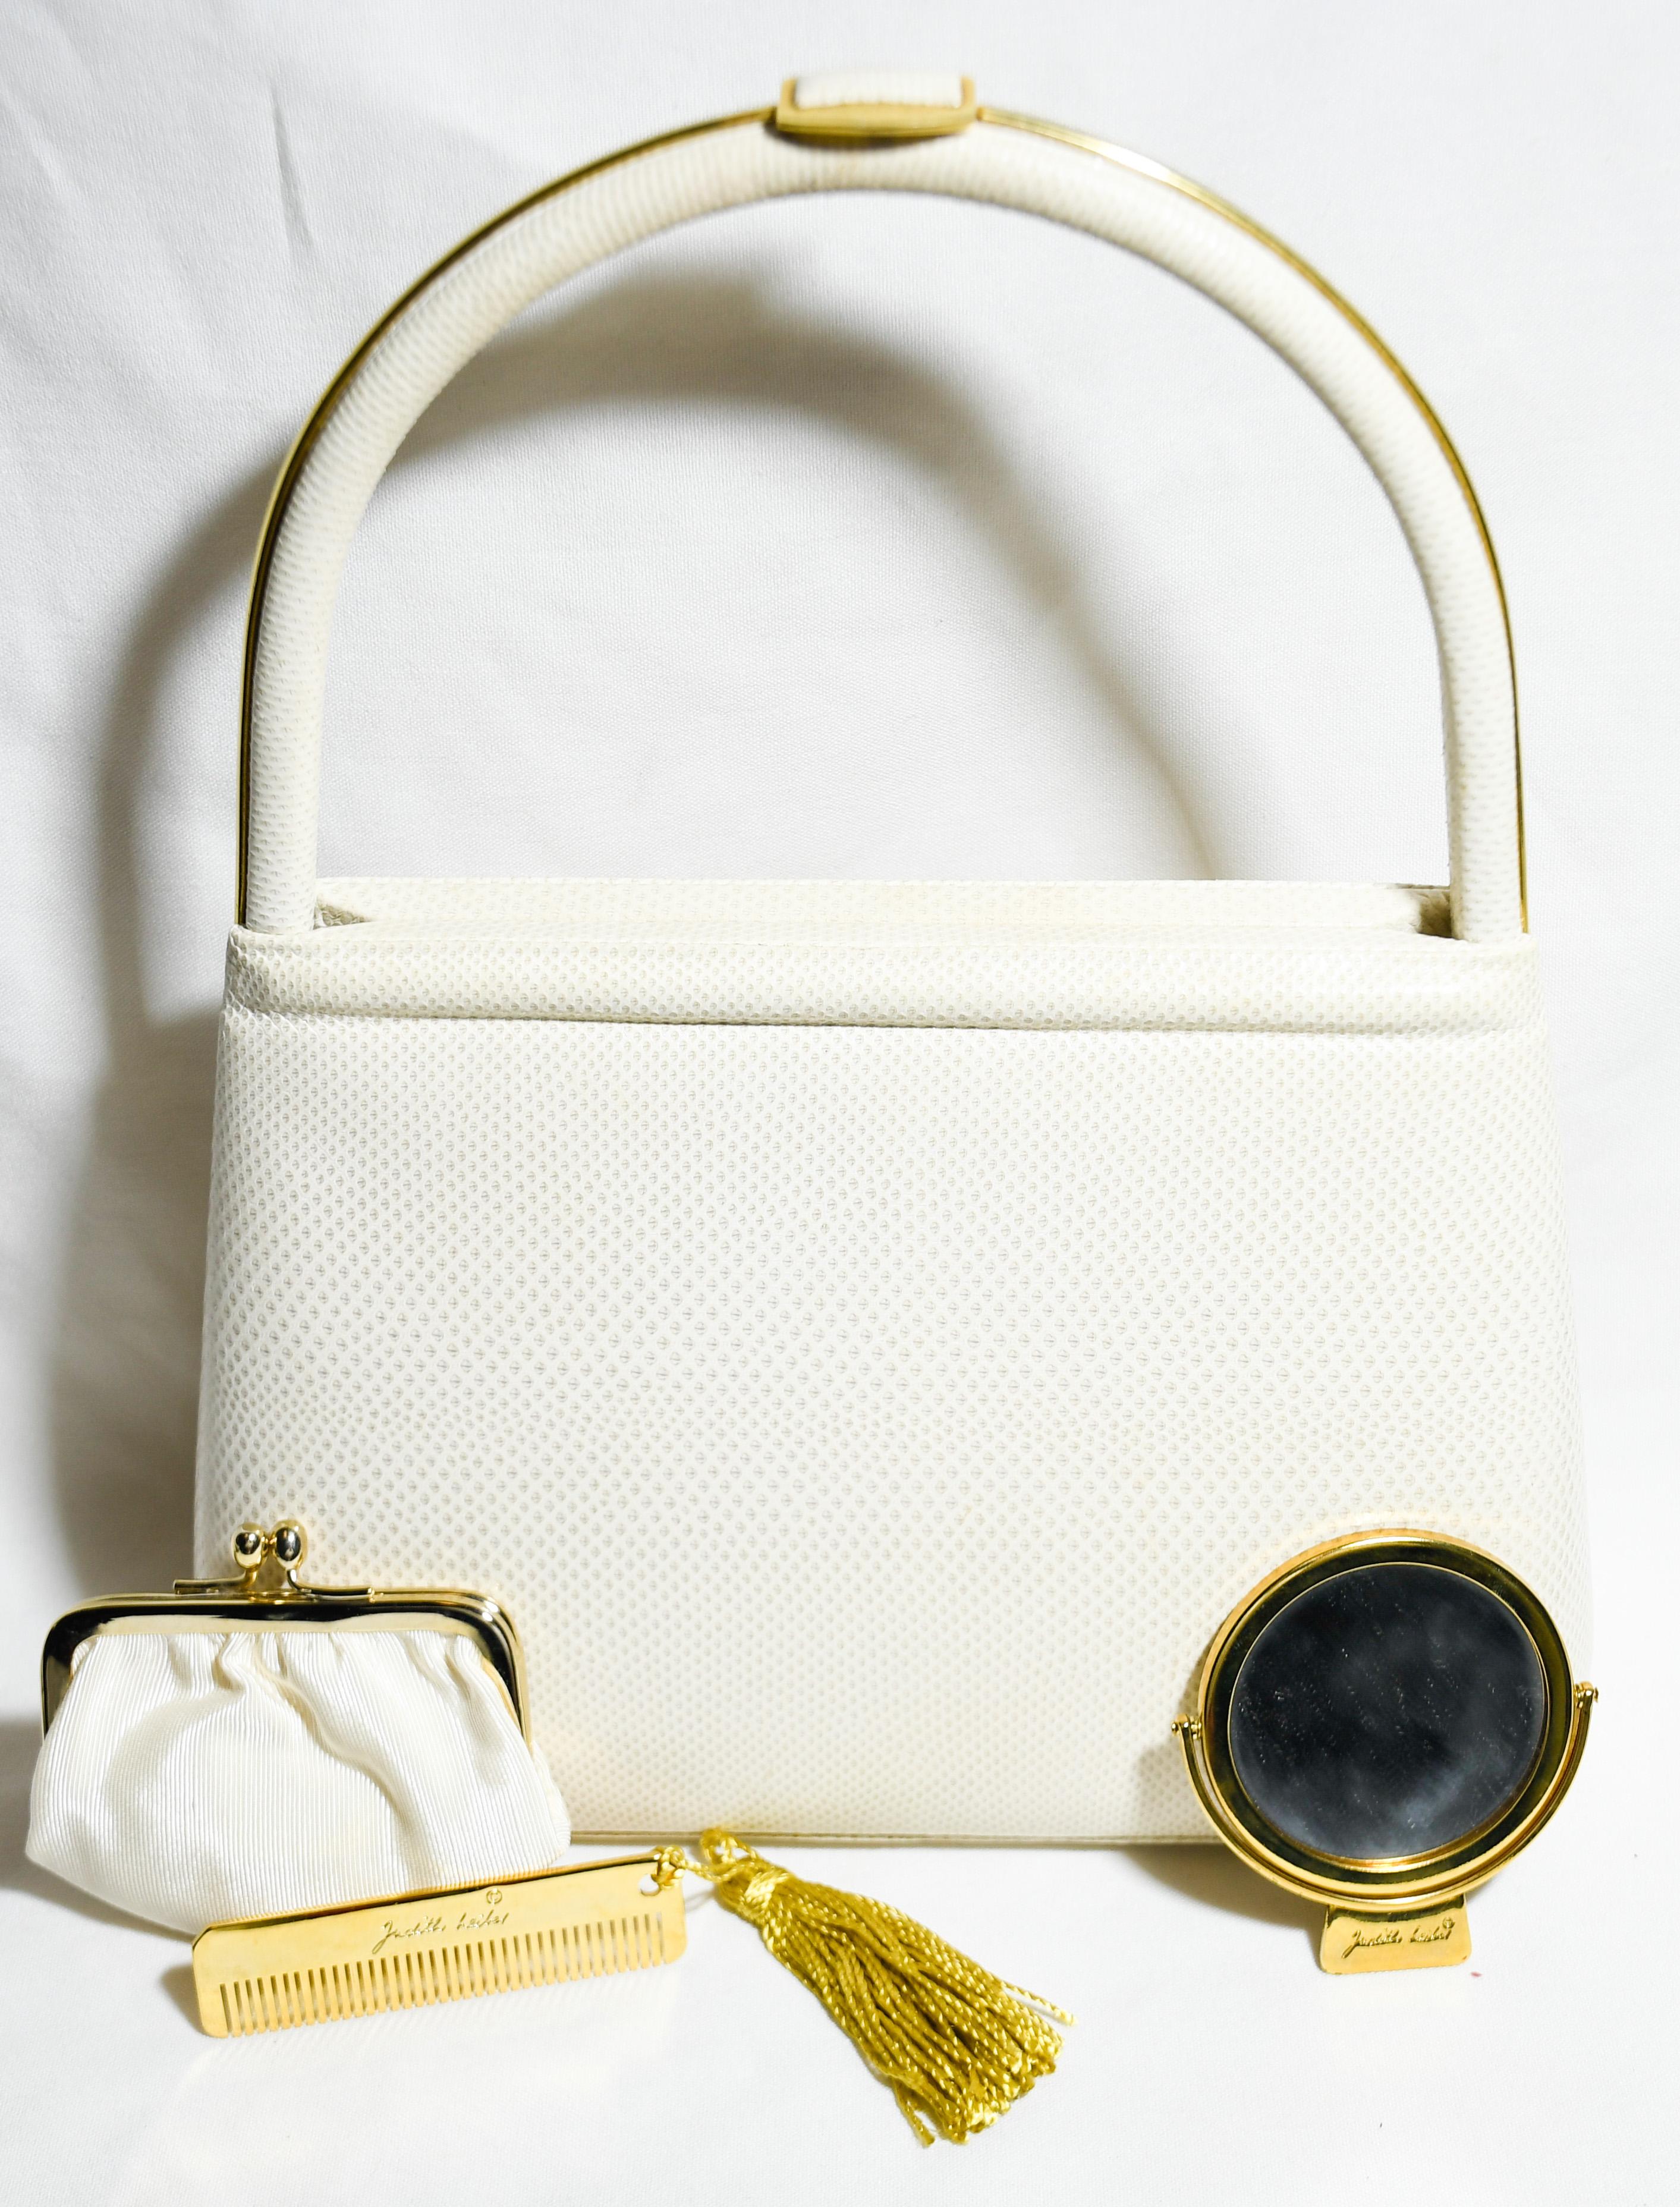 Judith Leiber Ivory Lizard Top Handle Structured Bag For Sale 2